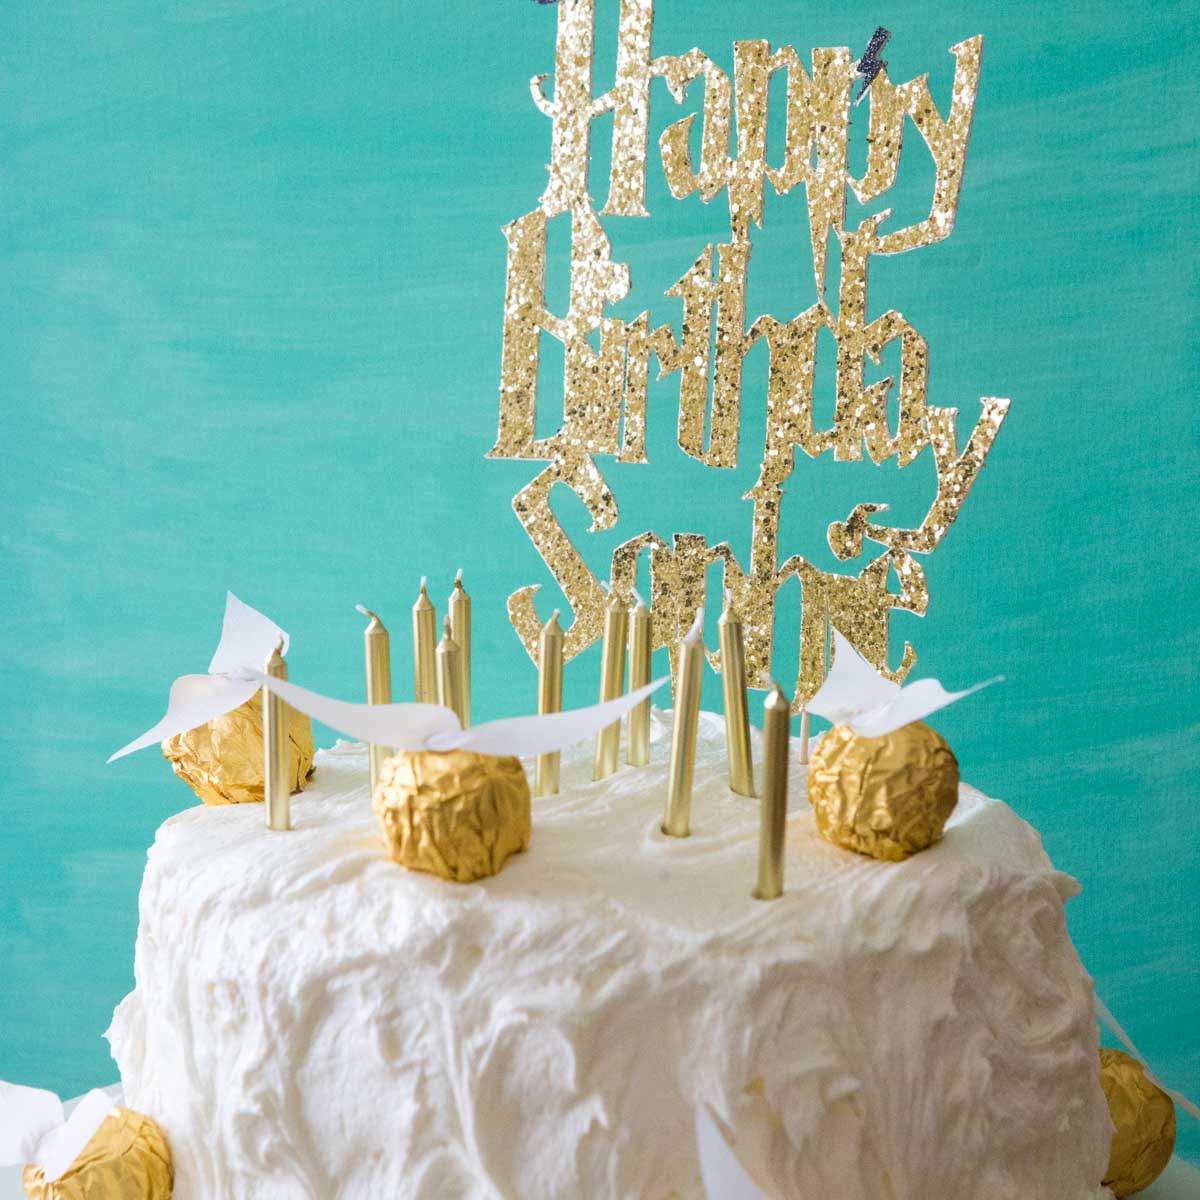 White Harry Potter cake covered in golden foil golden snitches.